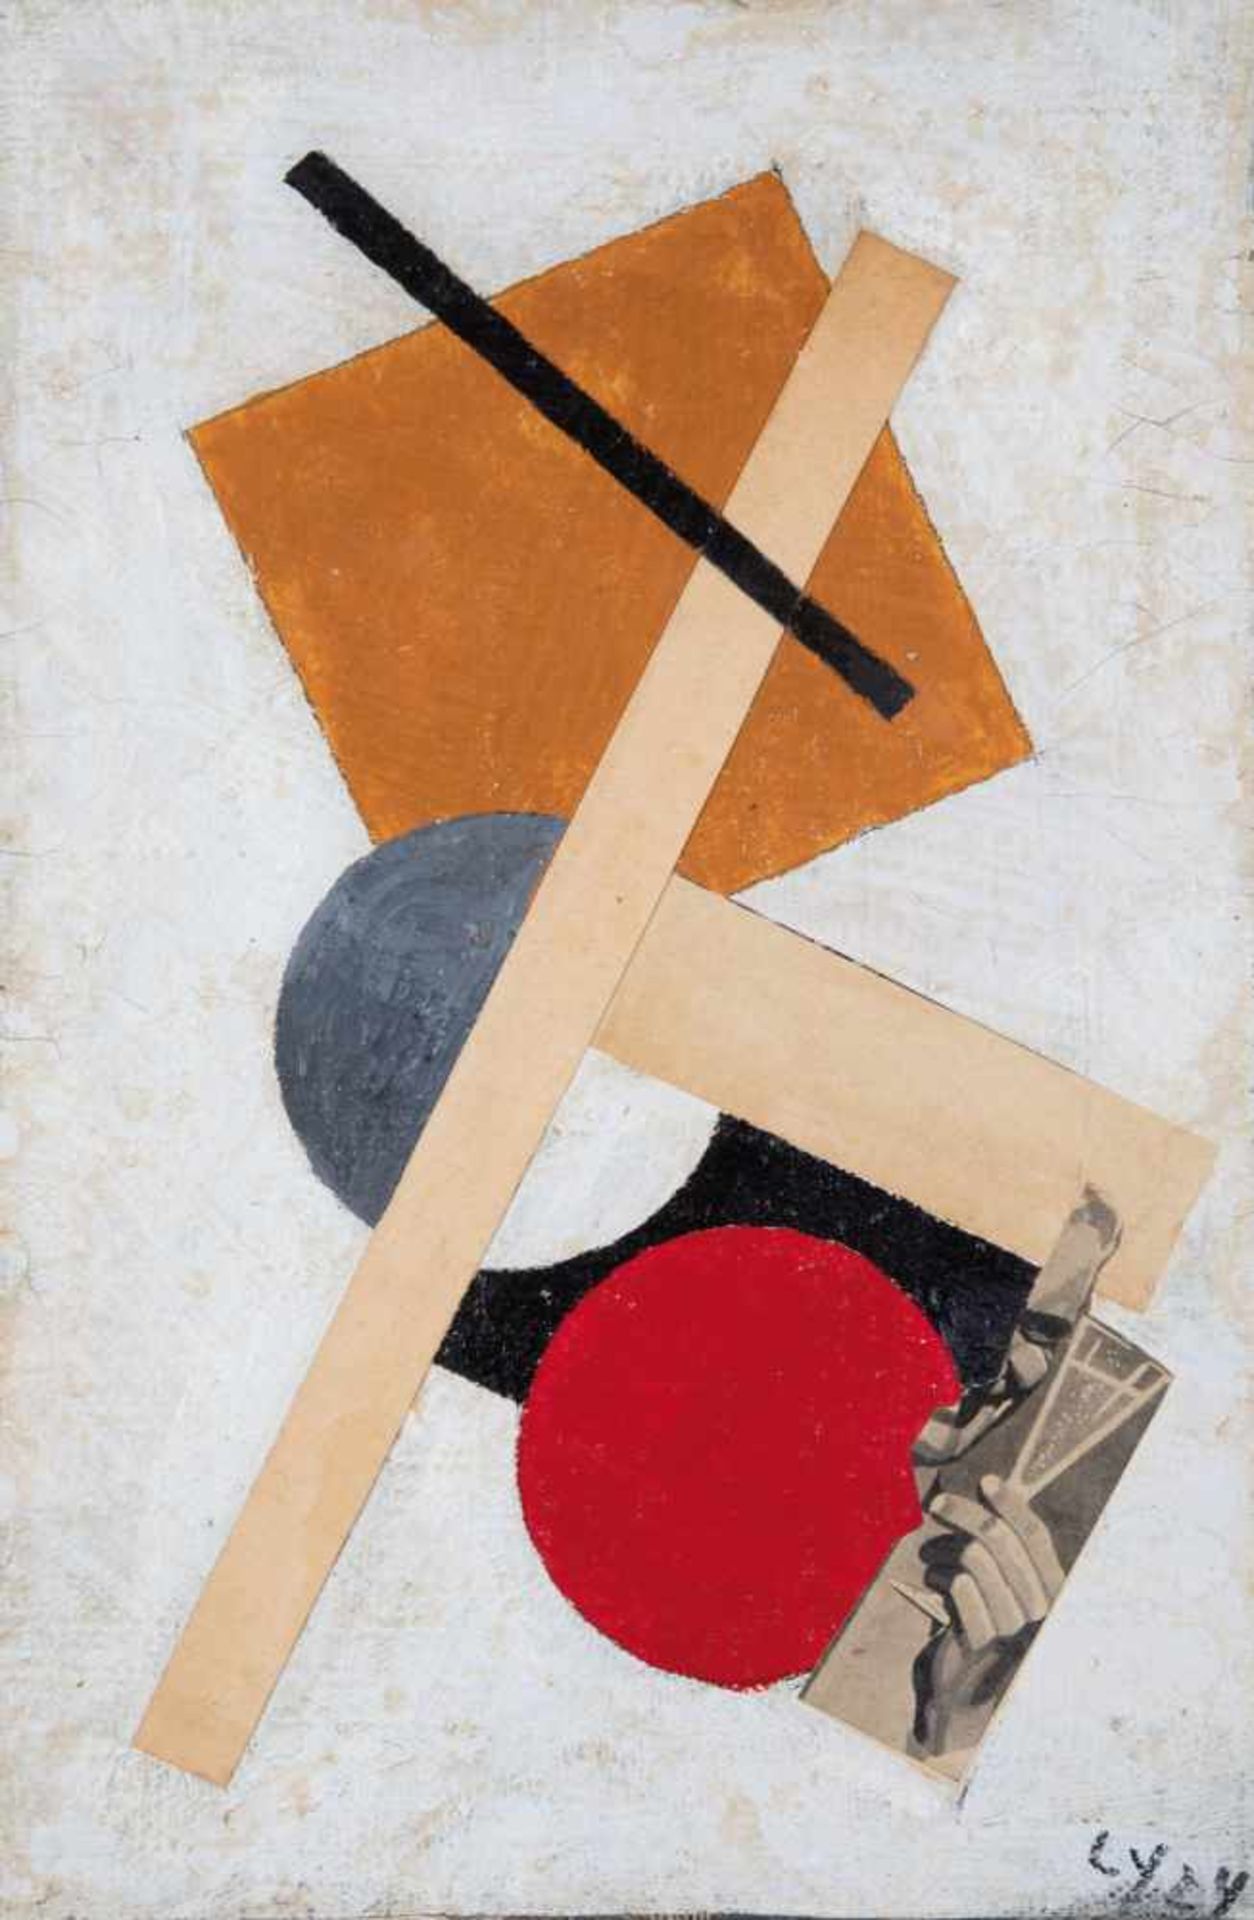 Suprematist (Russia, 1st half of the 20th century)Suprematistic collage. Mixed media on cardboard.